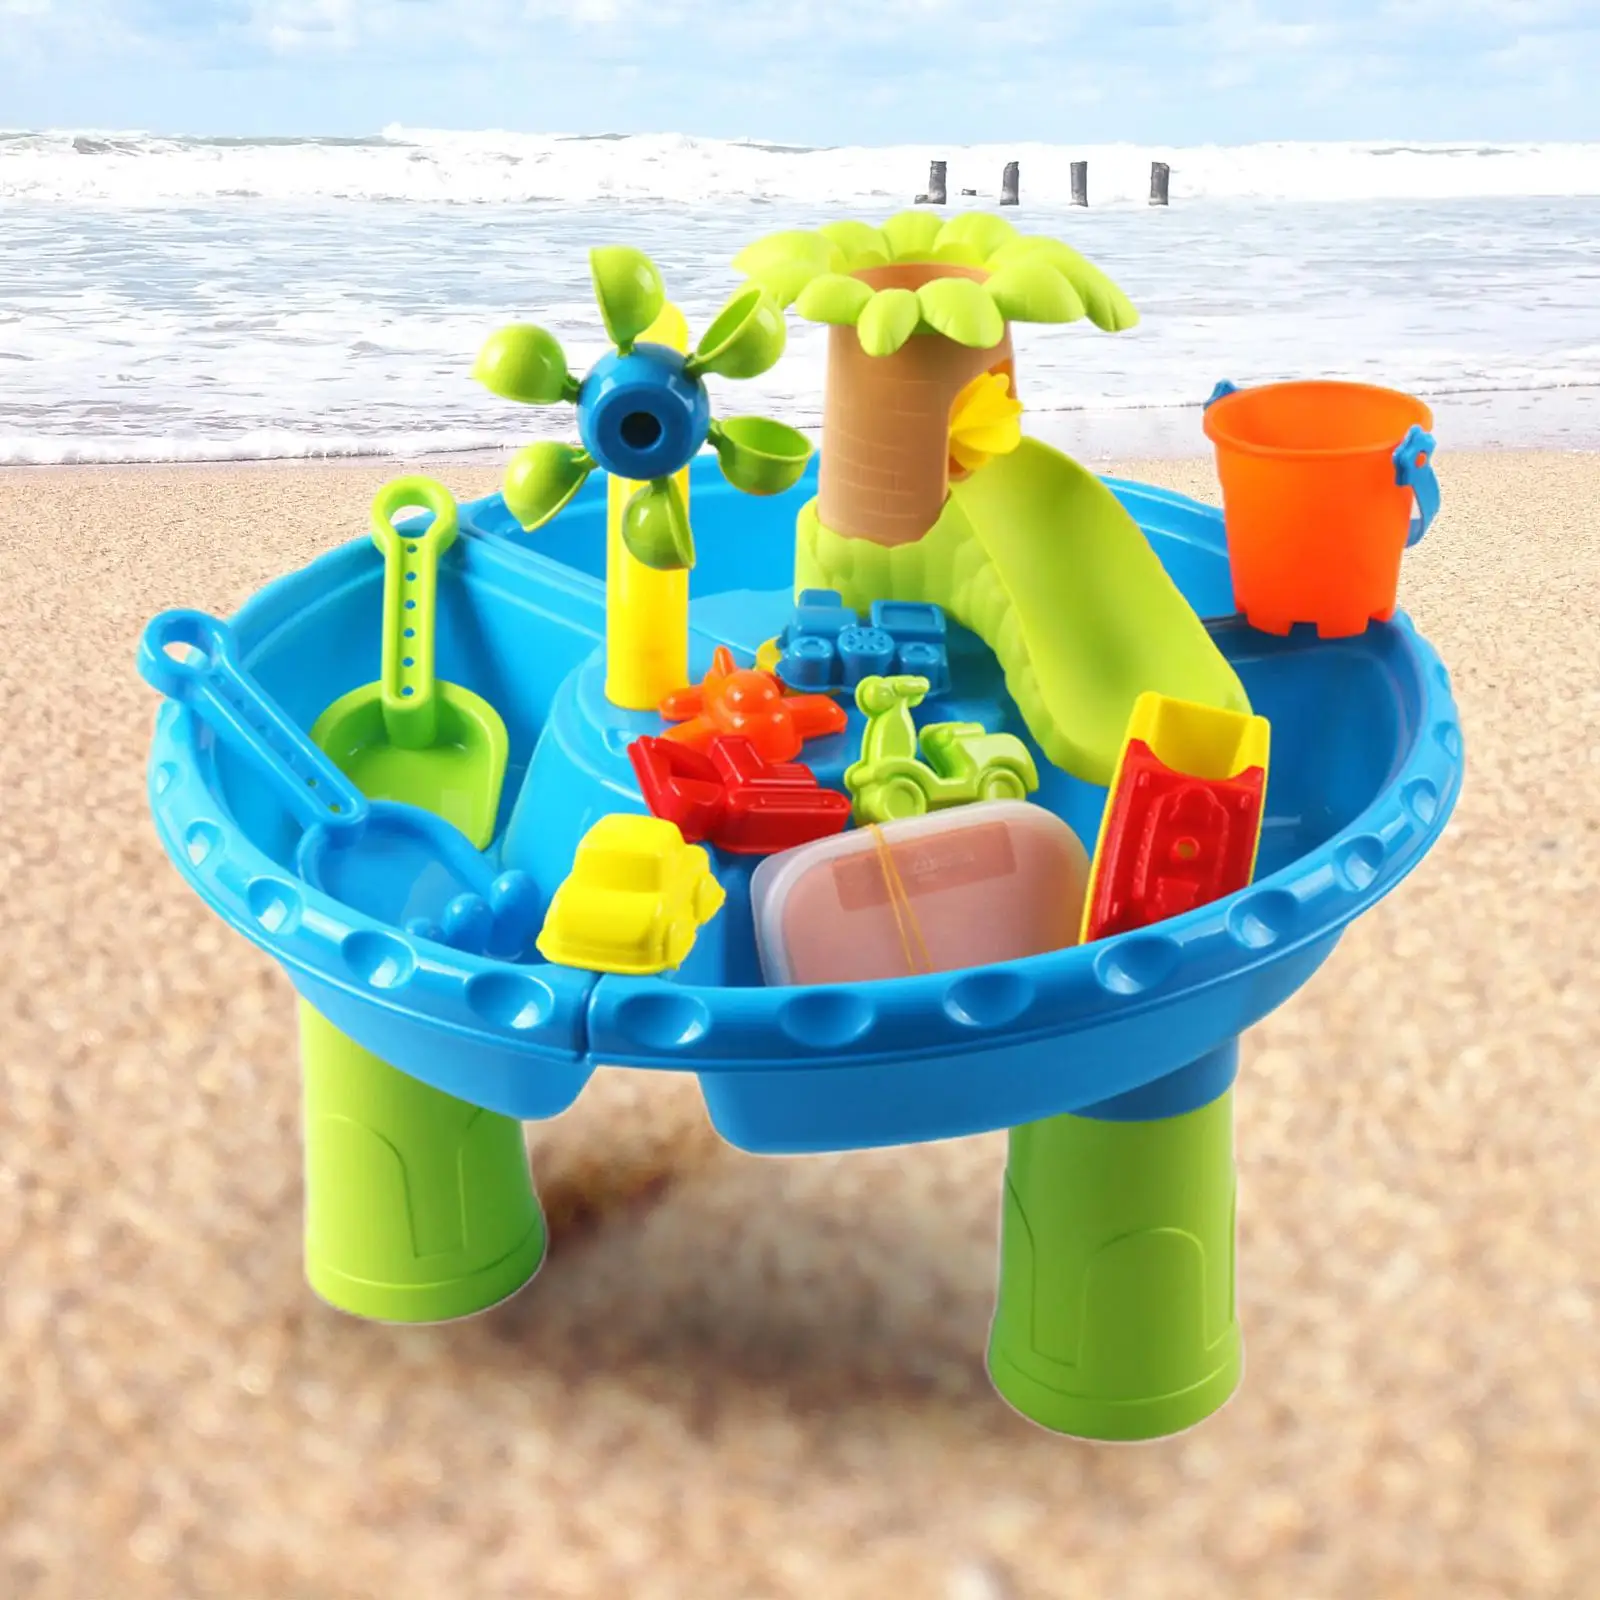  for Toddlers 1-3, and  ,   Sensory Table Beach  Toys Outdoor  for Children